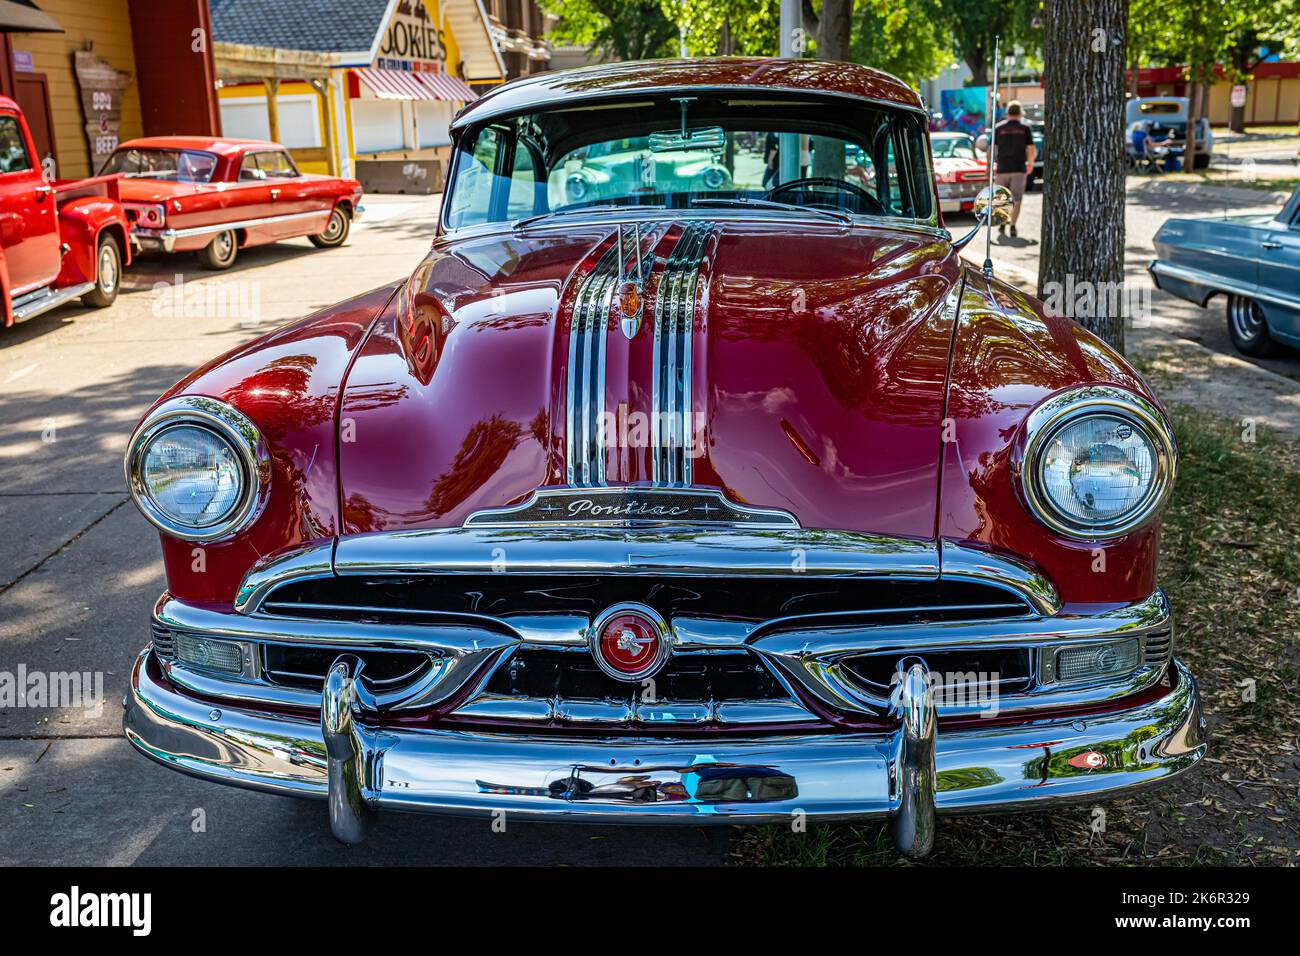 Falcon Heights, MN - June 19, 2022: Wide angle high perspective front view of a 1953 Pontiac Chieftain 2 Door Sedan at a local car show. Stock Photo